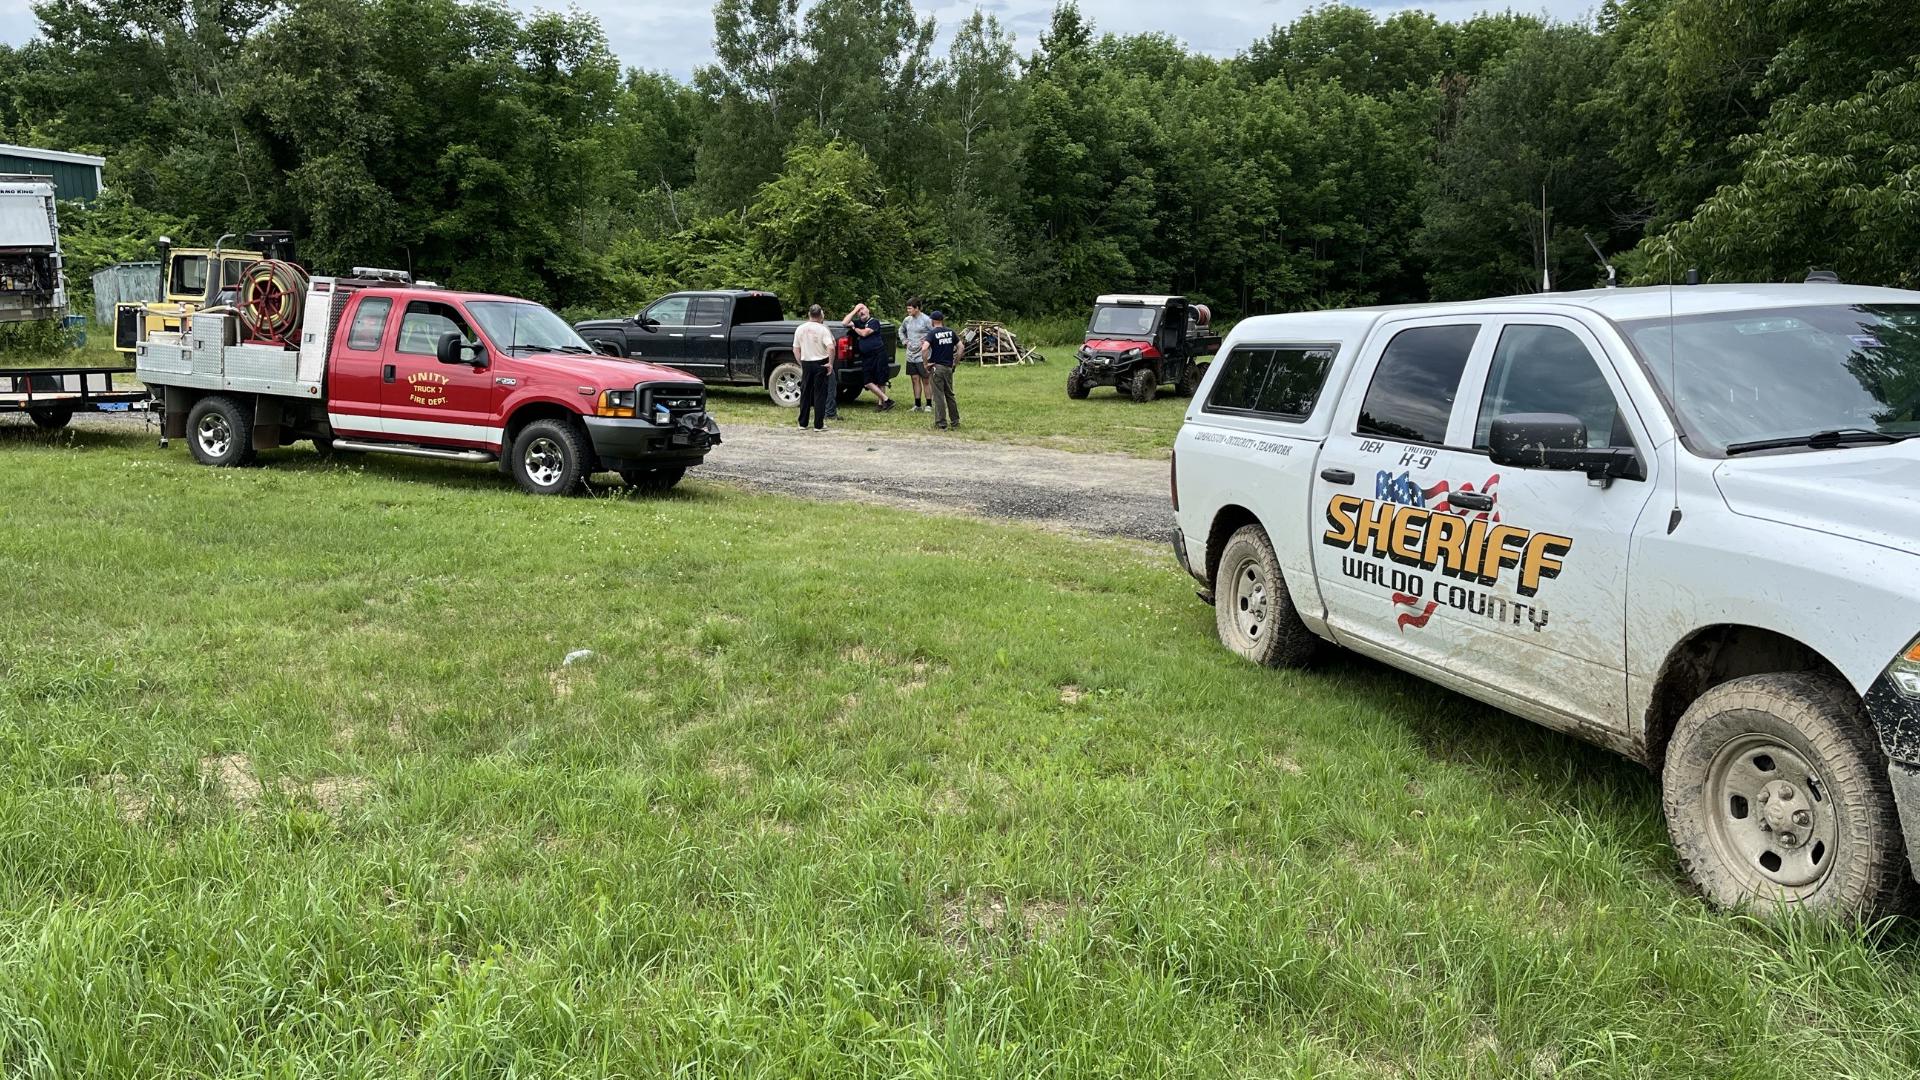 Unity volunteer fire officials said a rescue ATV was needed in order to get to the injured person, who was located about a mile in the woods off Albion Road.